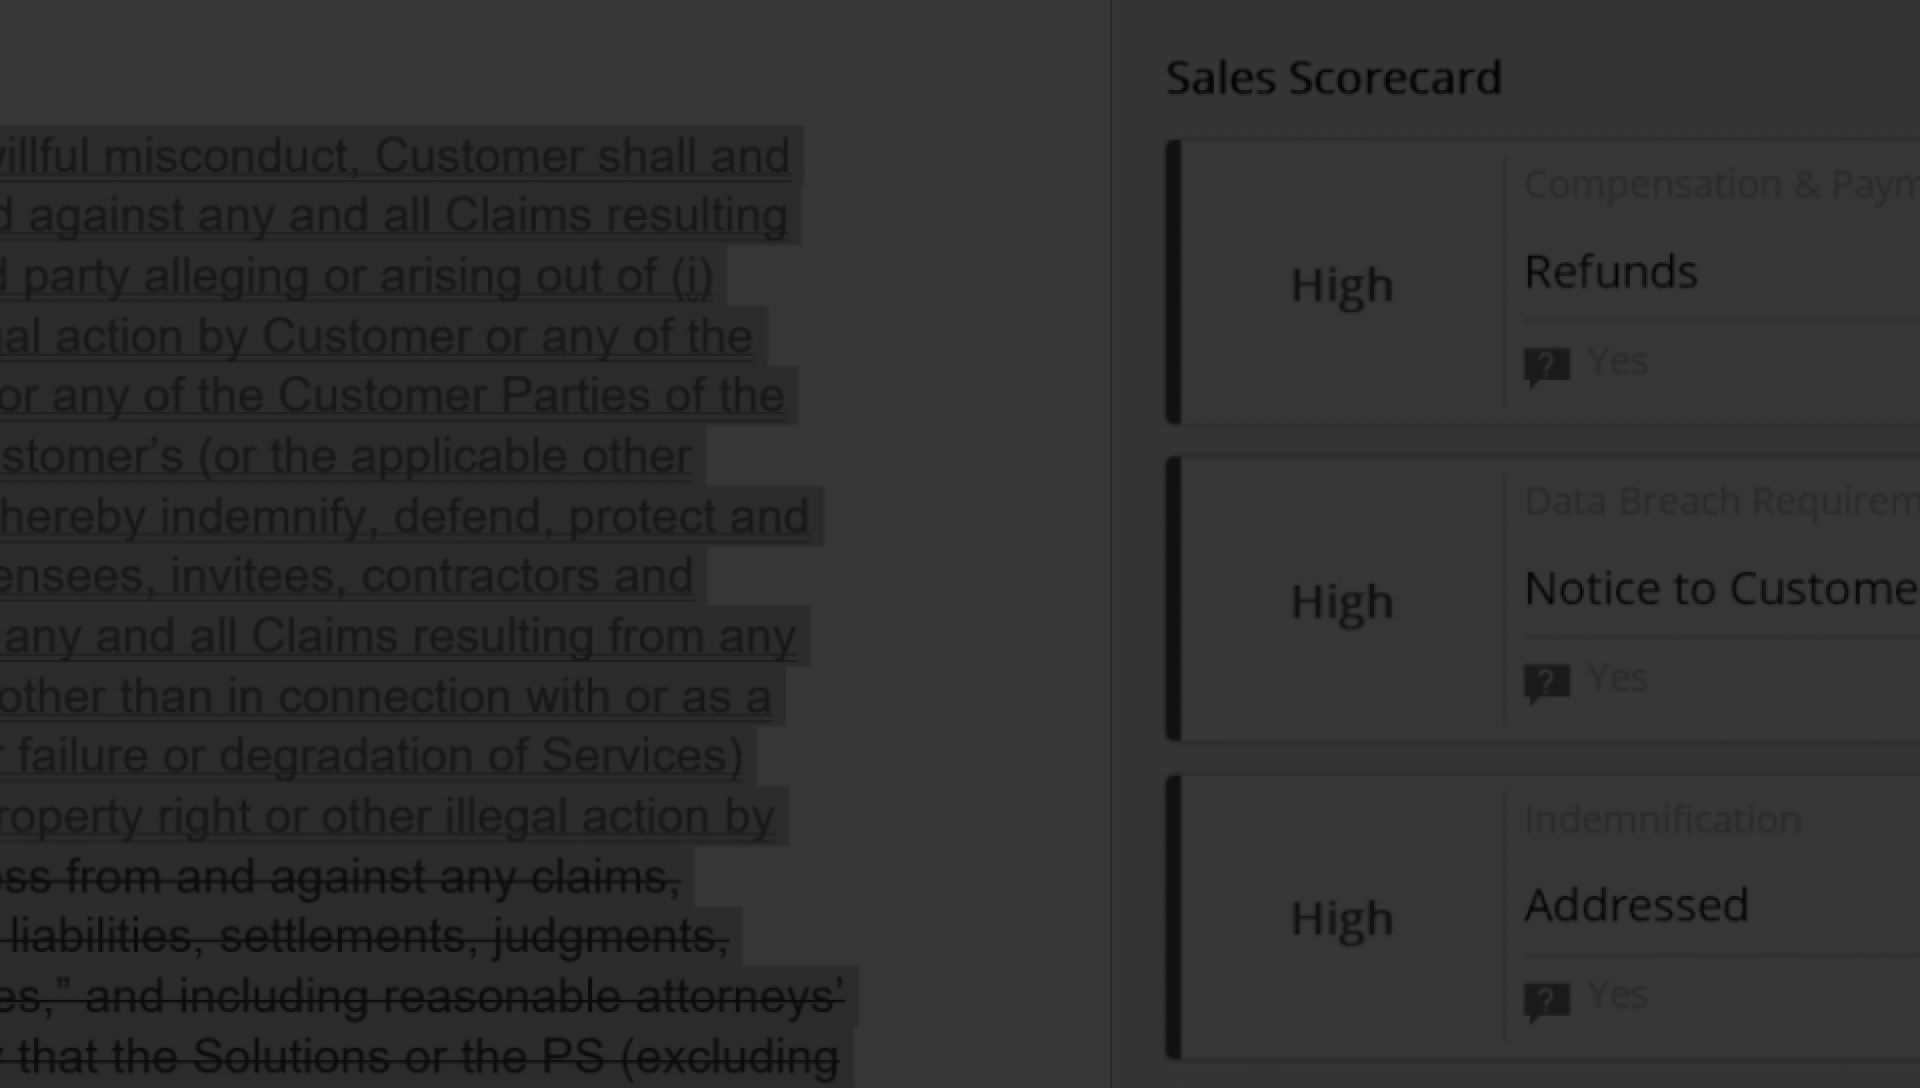 A sales scorecard being displayed while performing contract analytics with DocuSign Analyzer.